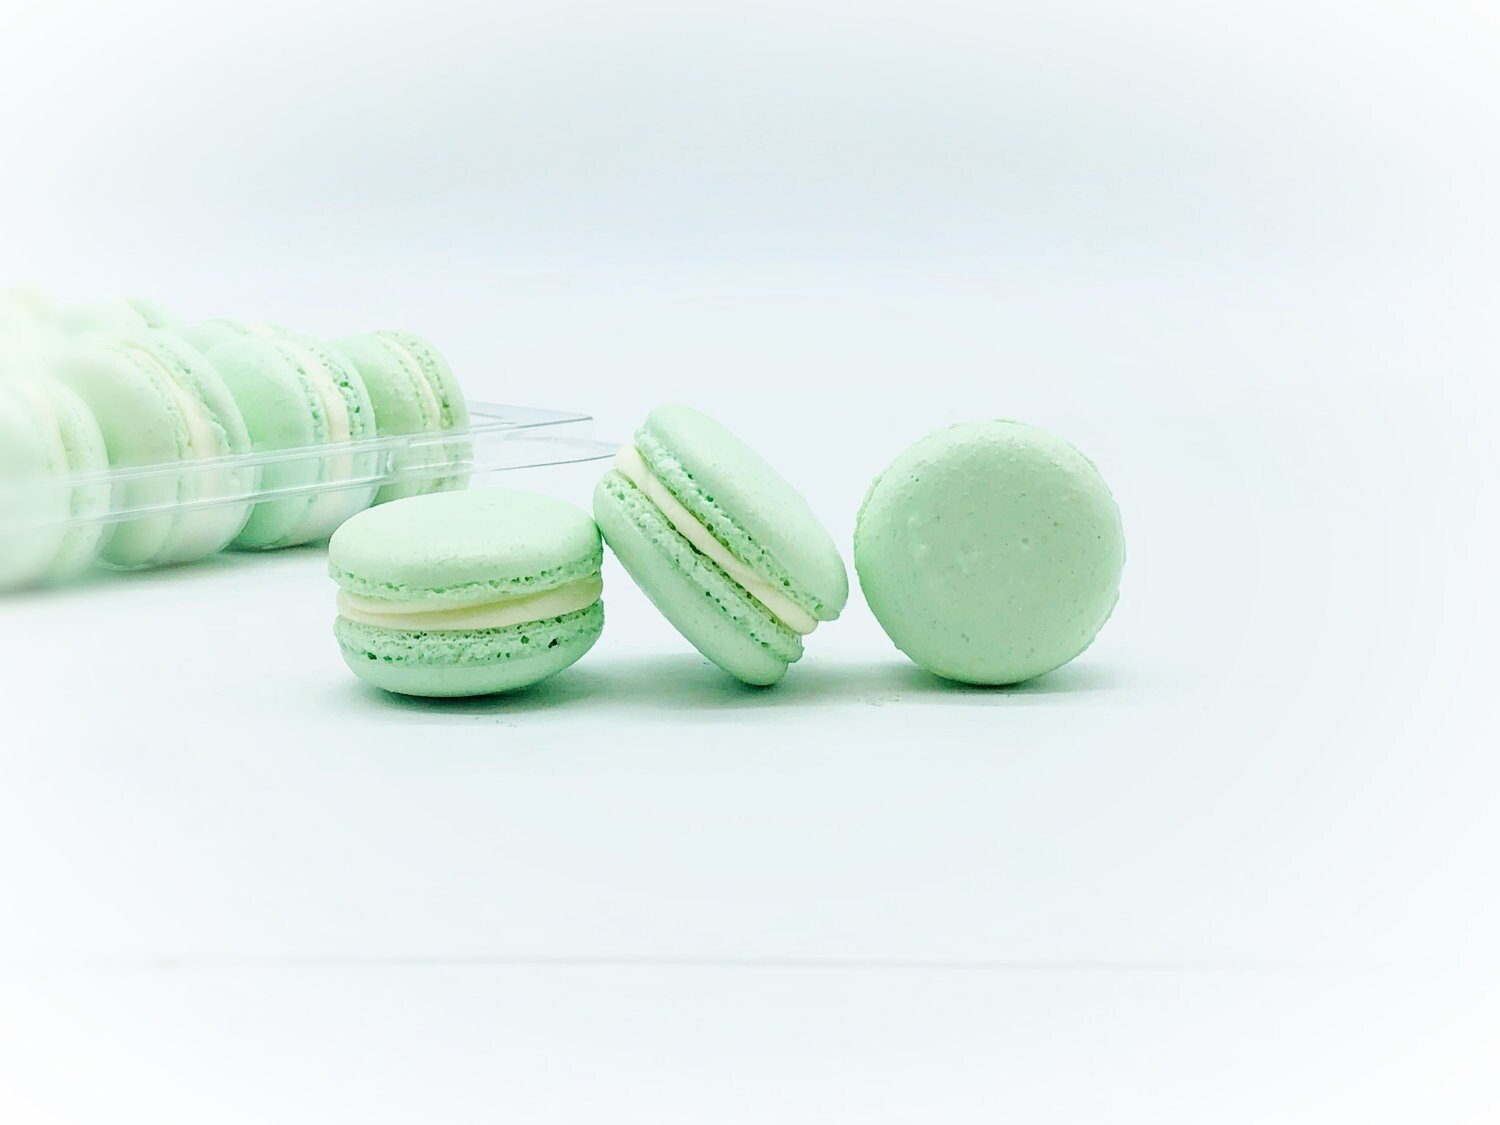 50 Pack Apple Chocolate Buttercream French Macaron Value Pack (Light Green) - Macaron Centrale